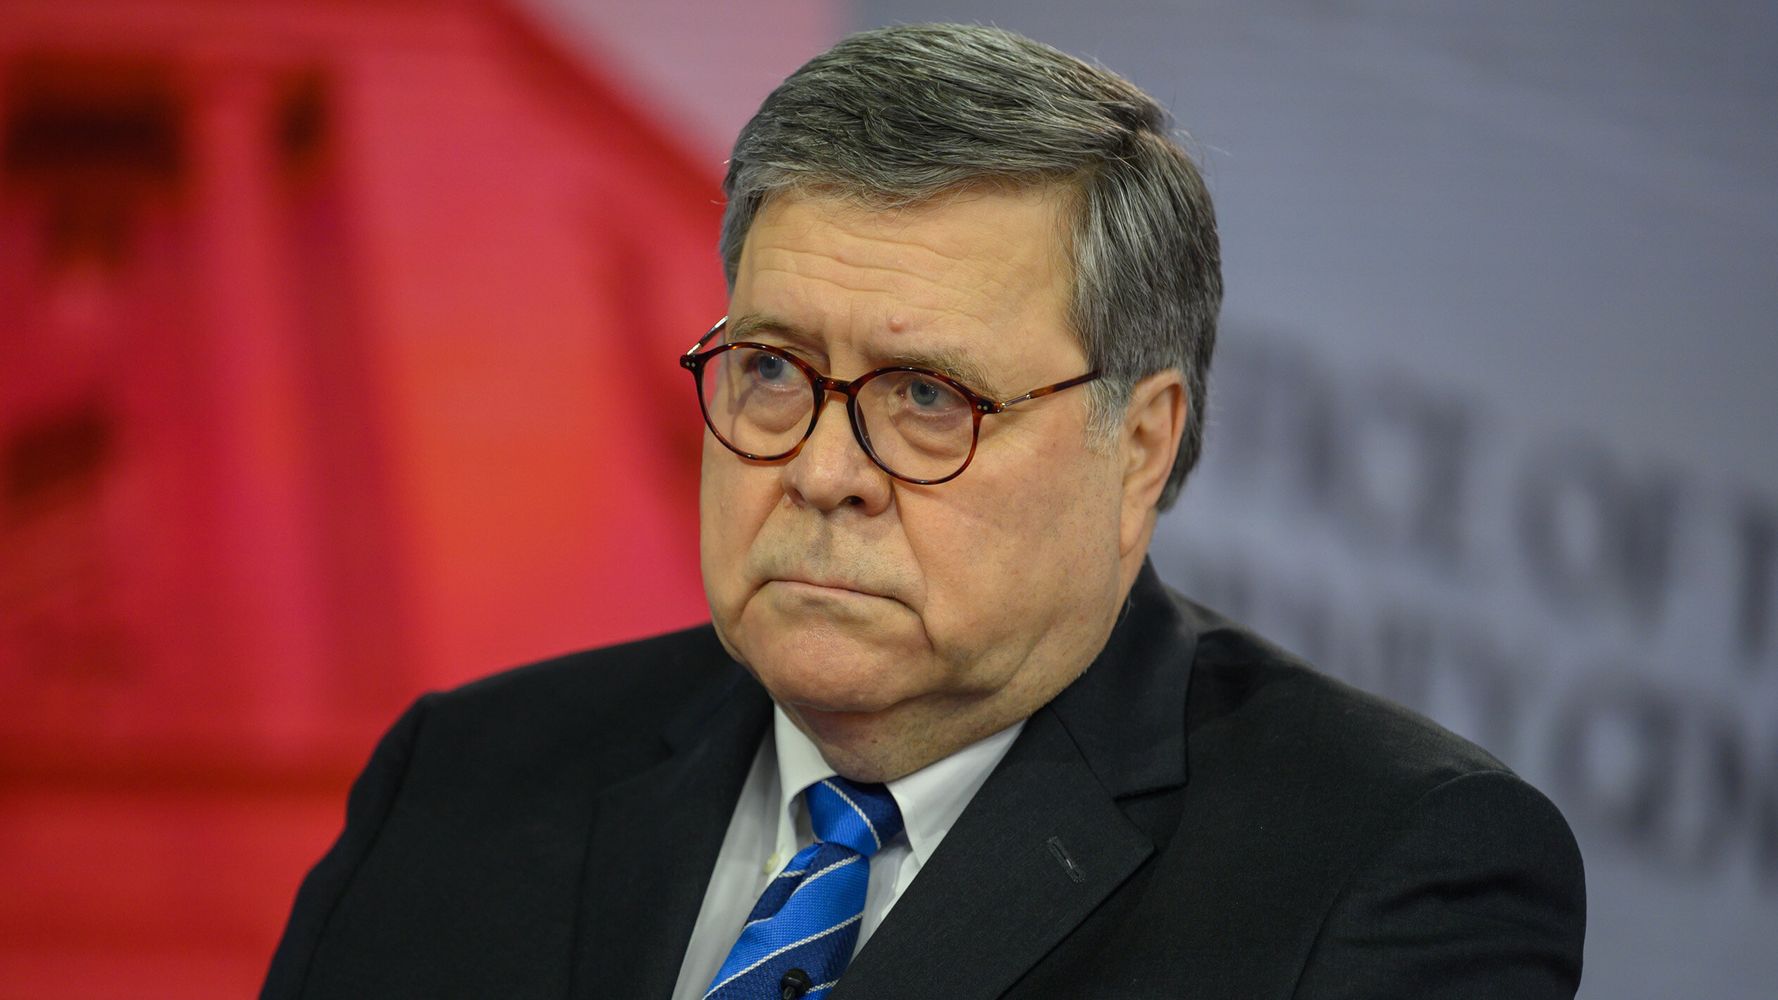 Bill Barr Predicts Justice Department Is 'Taking A Hard Look' At Trump's Inner Circle On Jan. 6